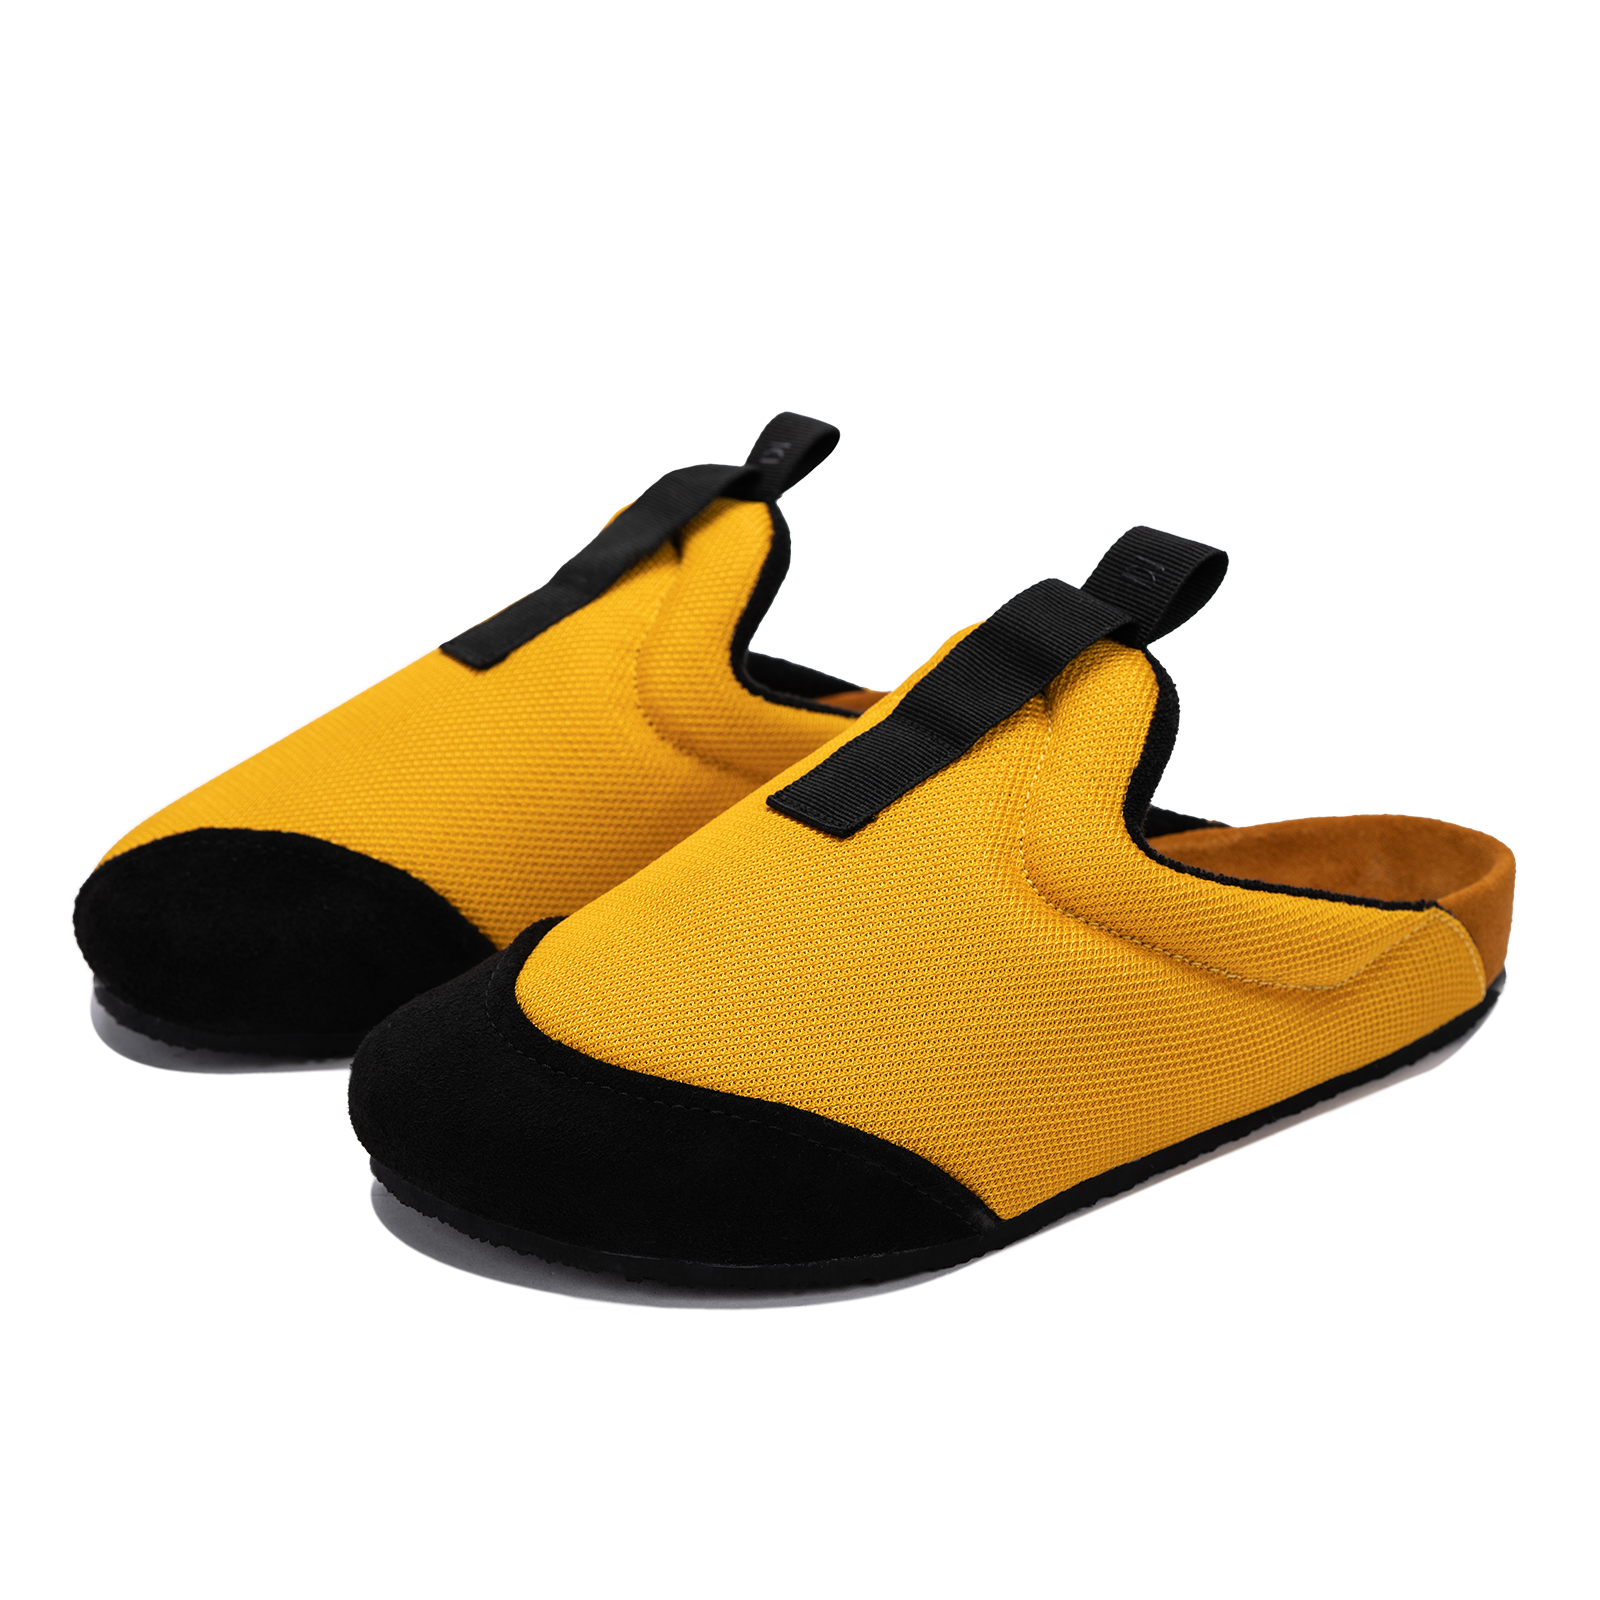 3/4 view Bantha 2.0 Yellow is a Mule made of Yellow mesh with a Black hairy suede to overlay, cork midsole with suede top lining Black VIbram rubber bottom and woven top pull